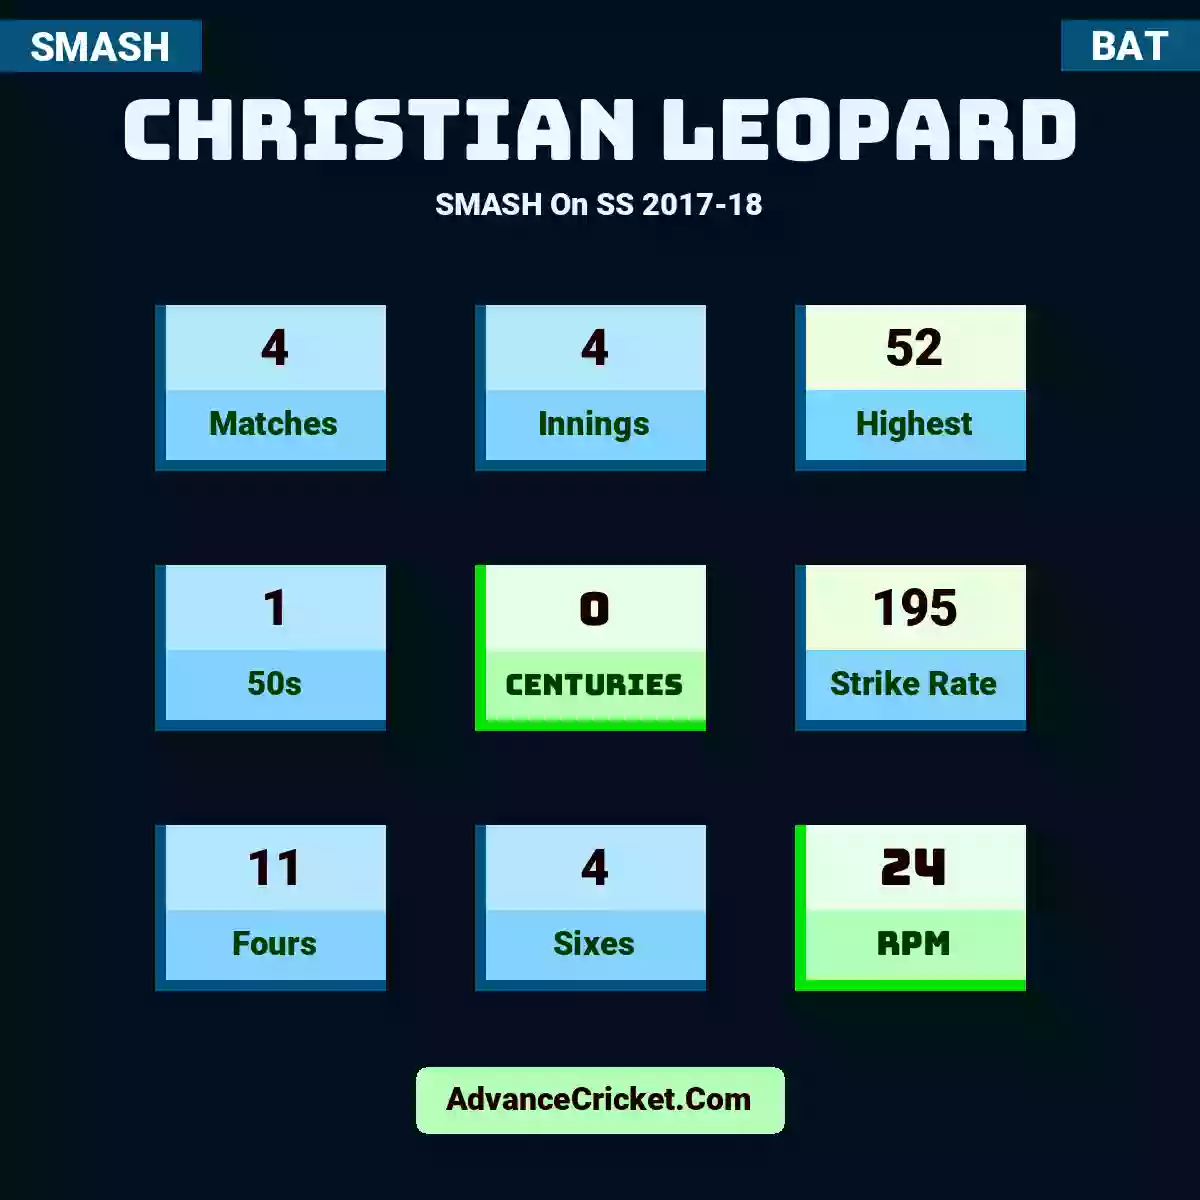 Christian Leopard SMASH  On SS 2017-18, Christian Leopard played 4 matches, scored 52 runs as highest, 1 half-centuries, and 0 centuries, with a strike rate of 195. C.Leopard hit 11 fours and 4 sixes, with an RPM of 24.